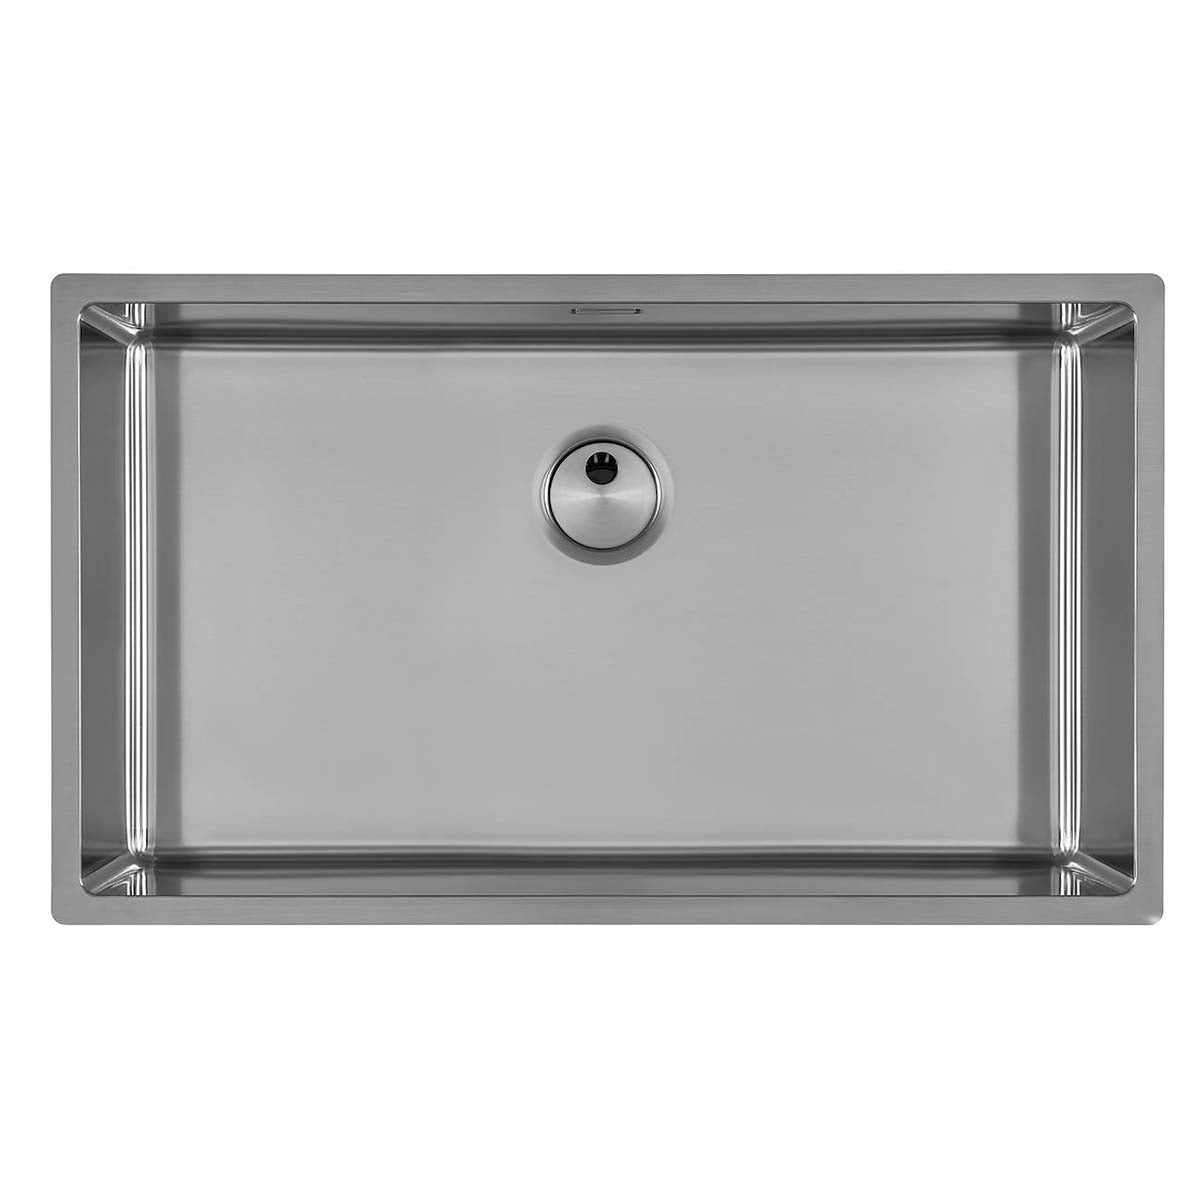 Foster Skin 710 Kitchen Sink - Brushed Stainless Steel 